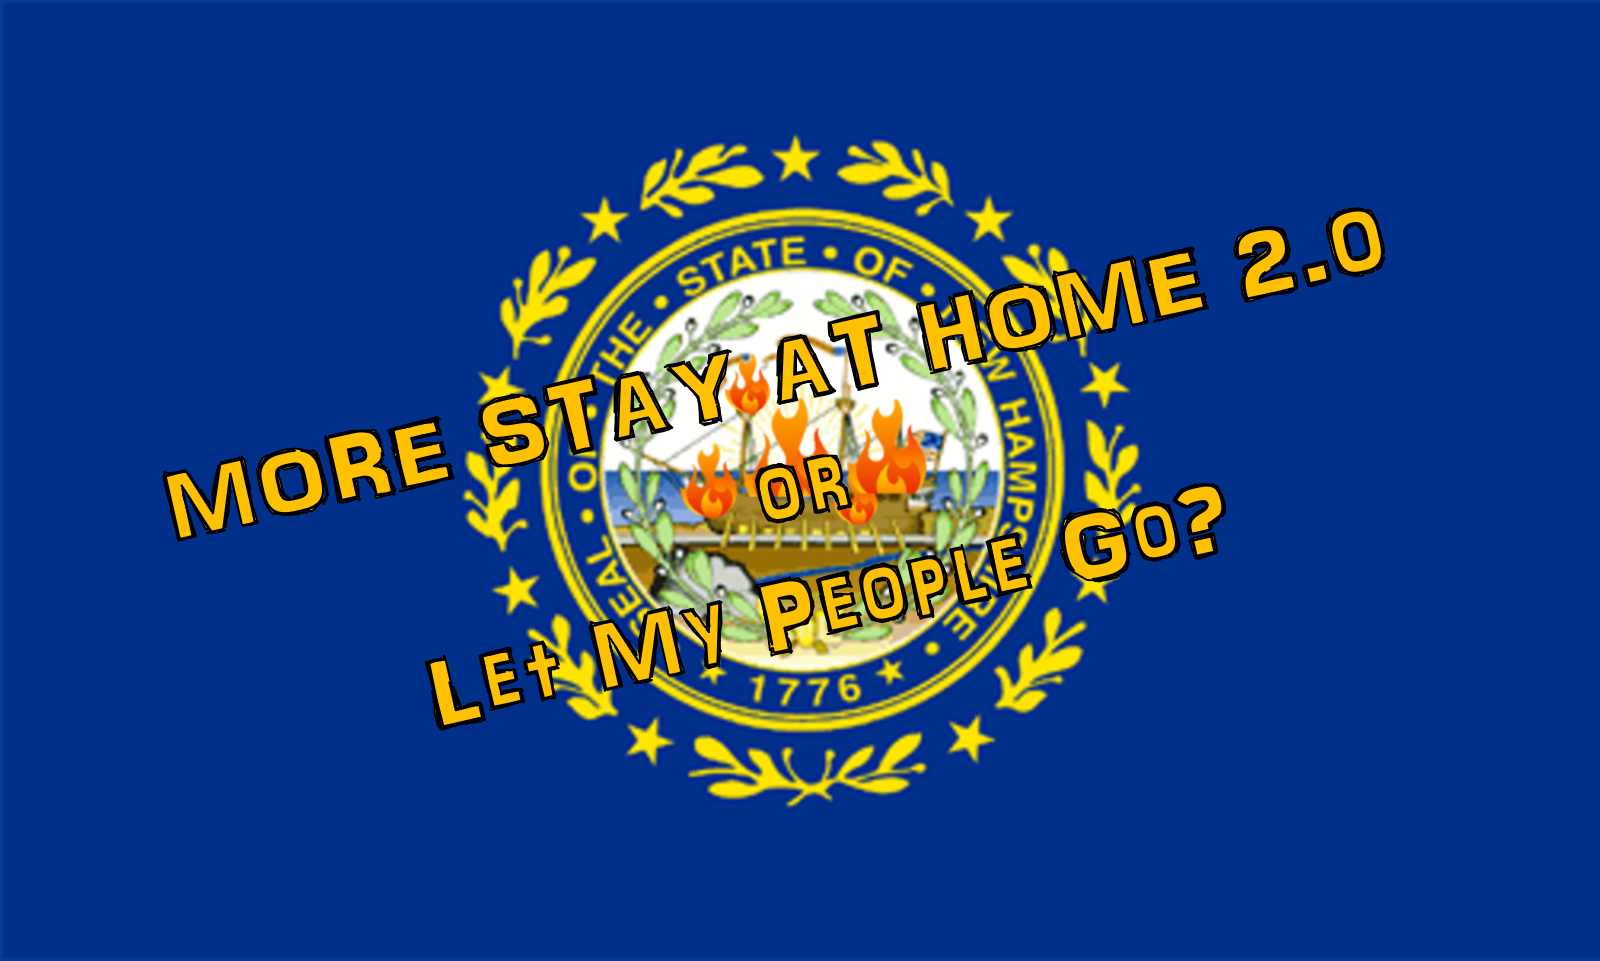 More NH Stay at home 2.0 or let my people go